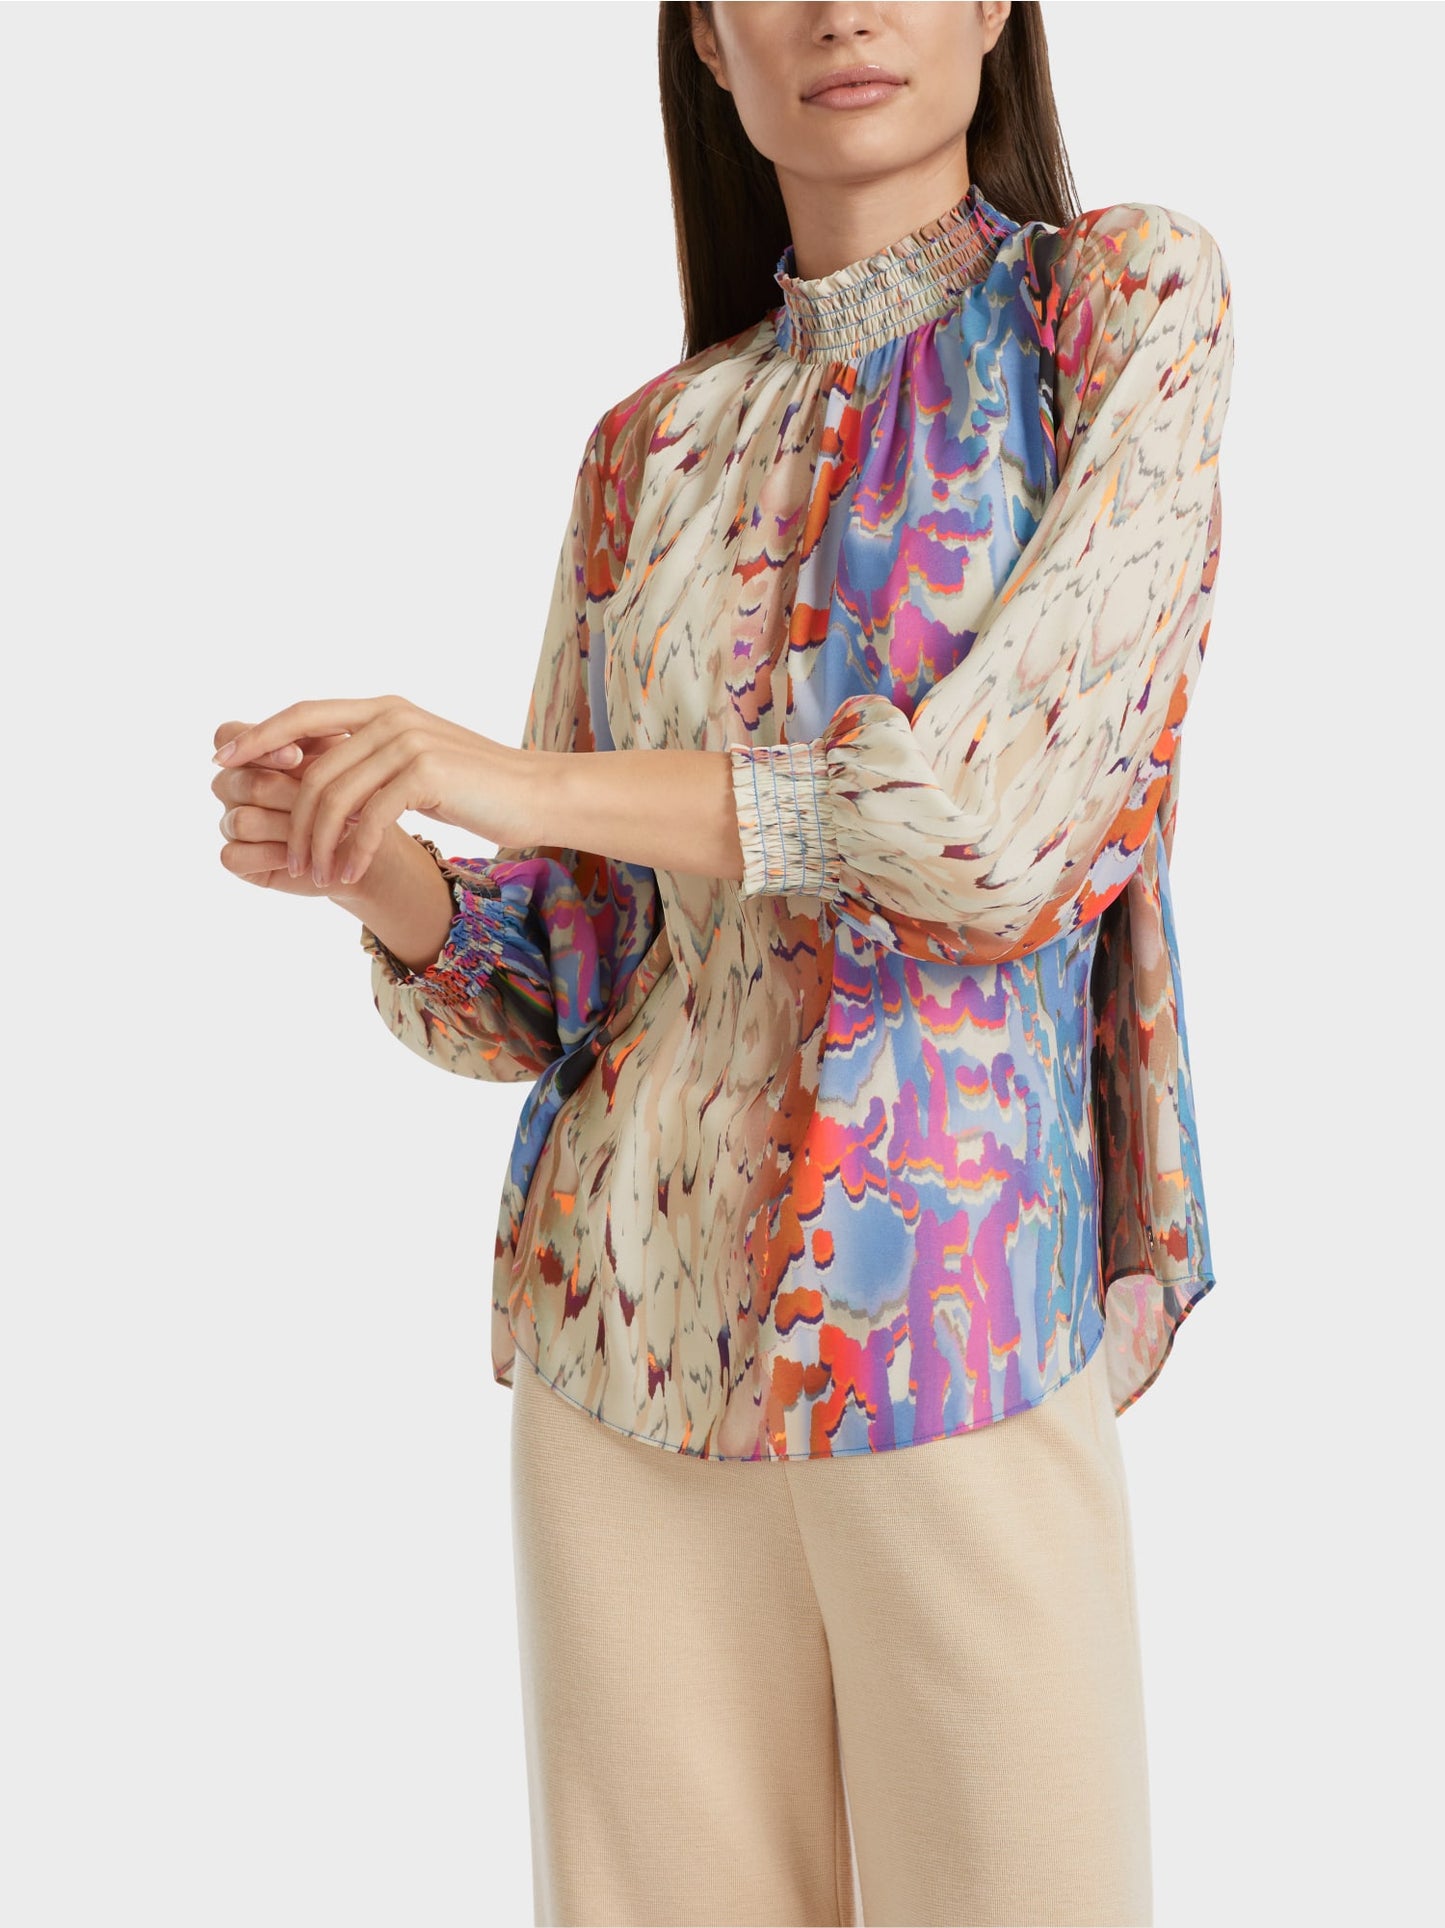 Colorful "Rethink Together" Blouse